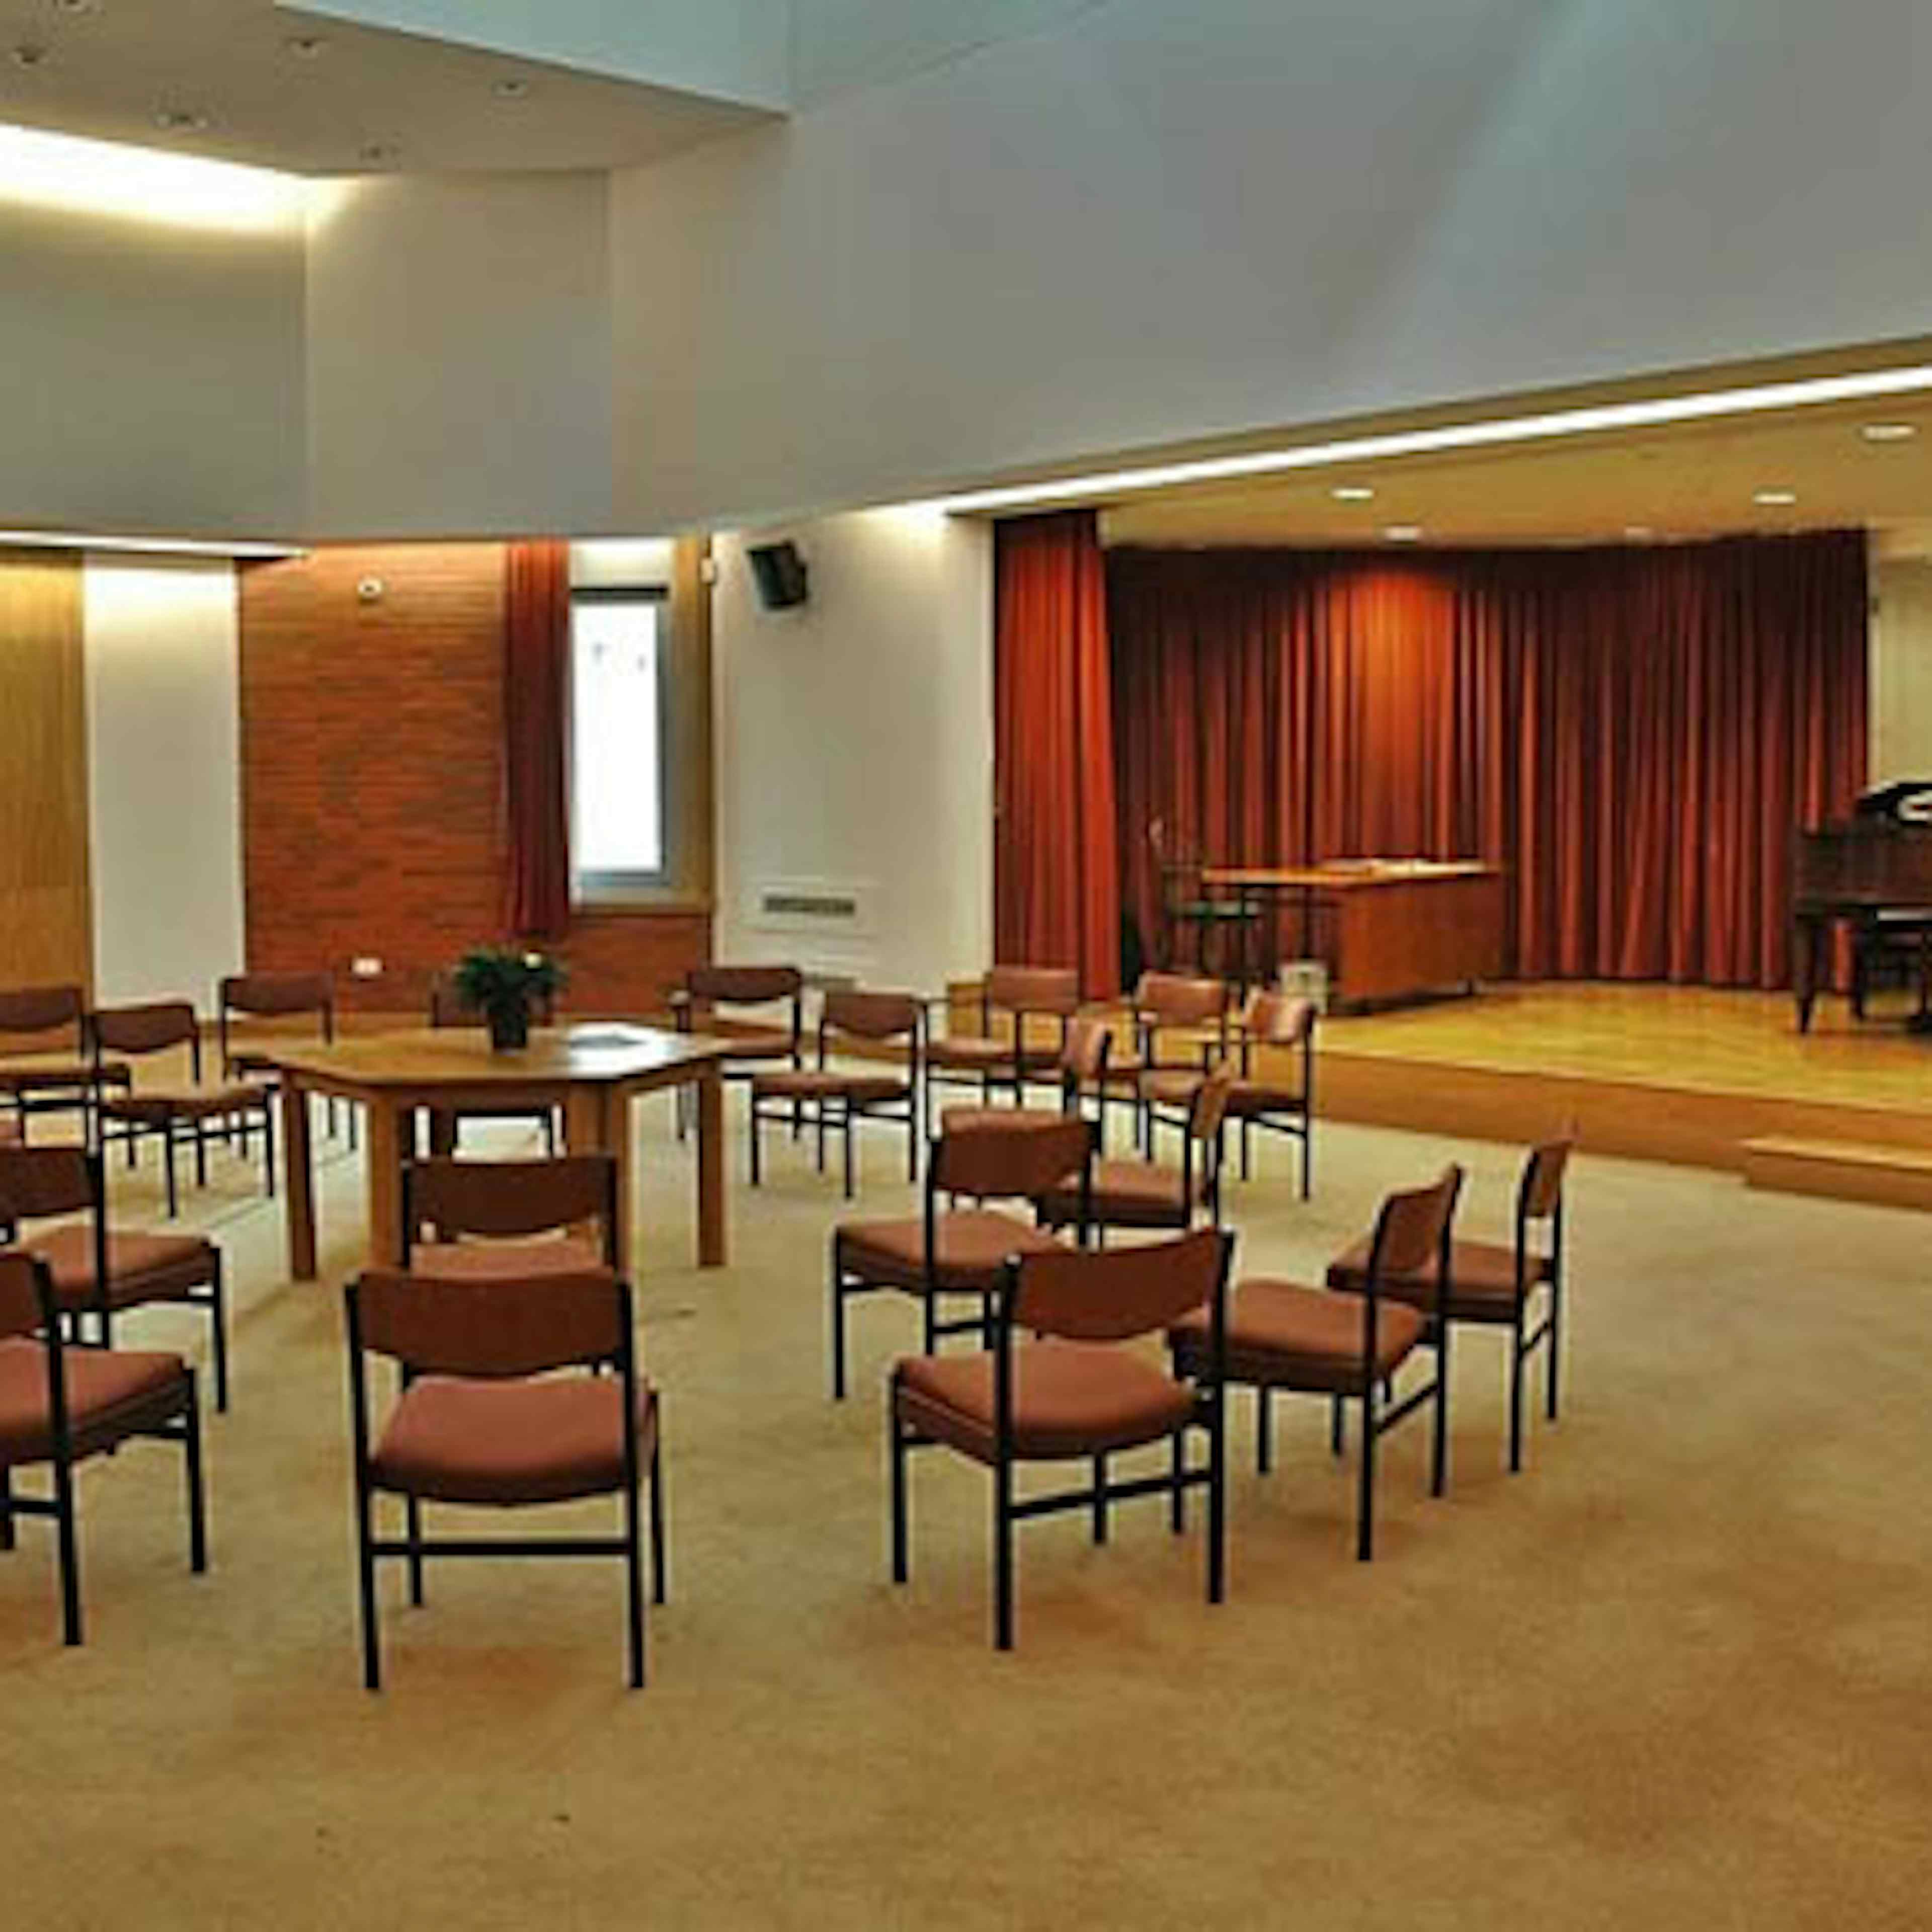 Liverpool Quaker Meeting House - Large Meeting Room image 2